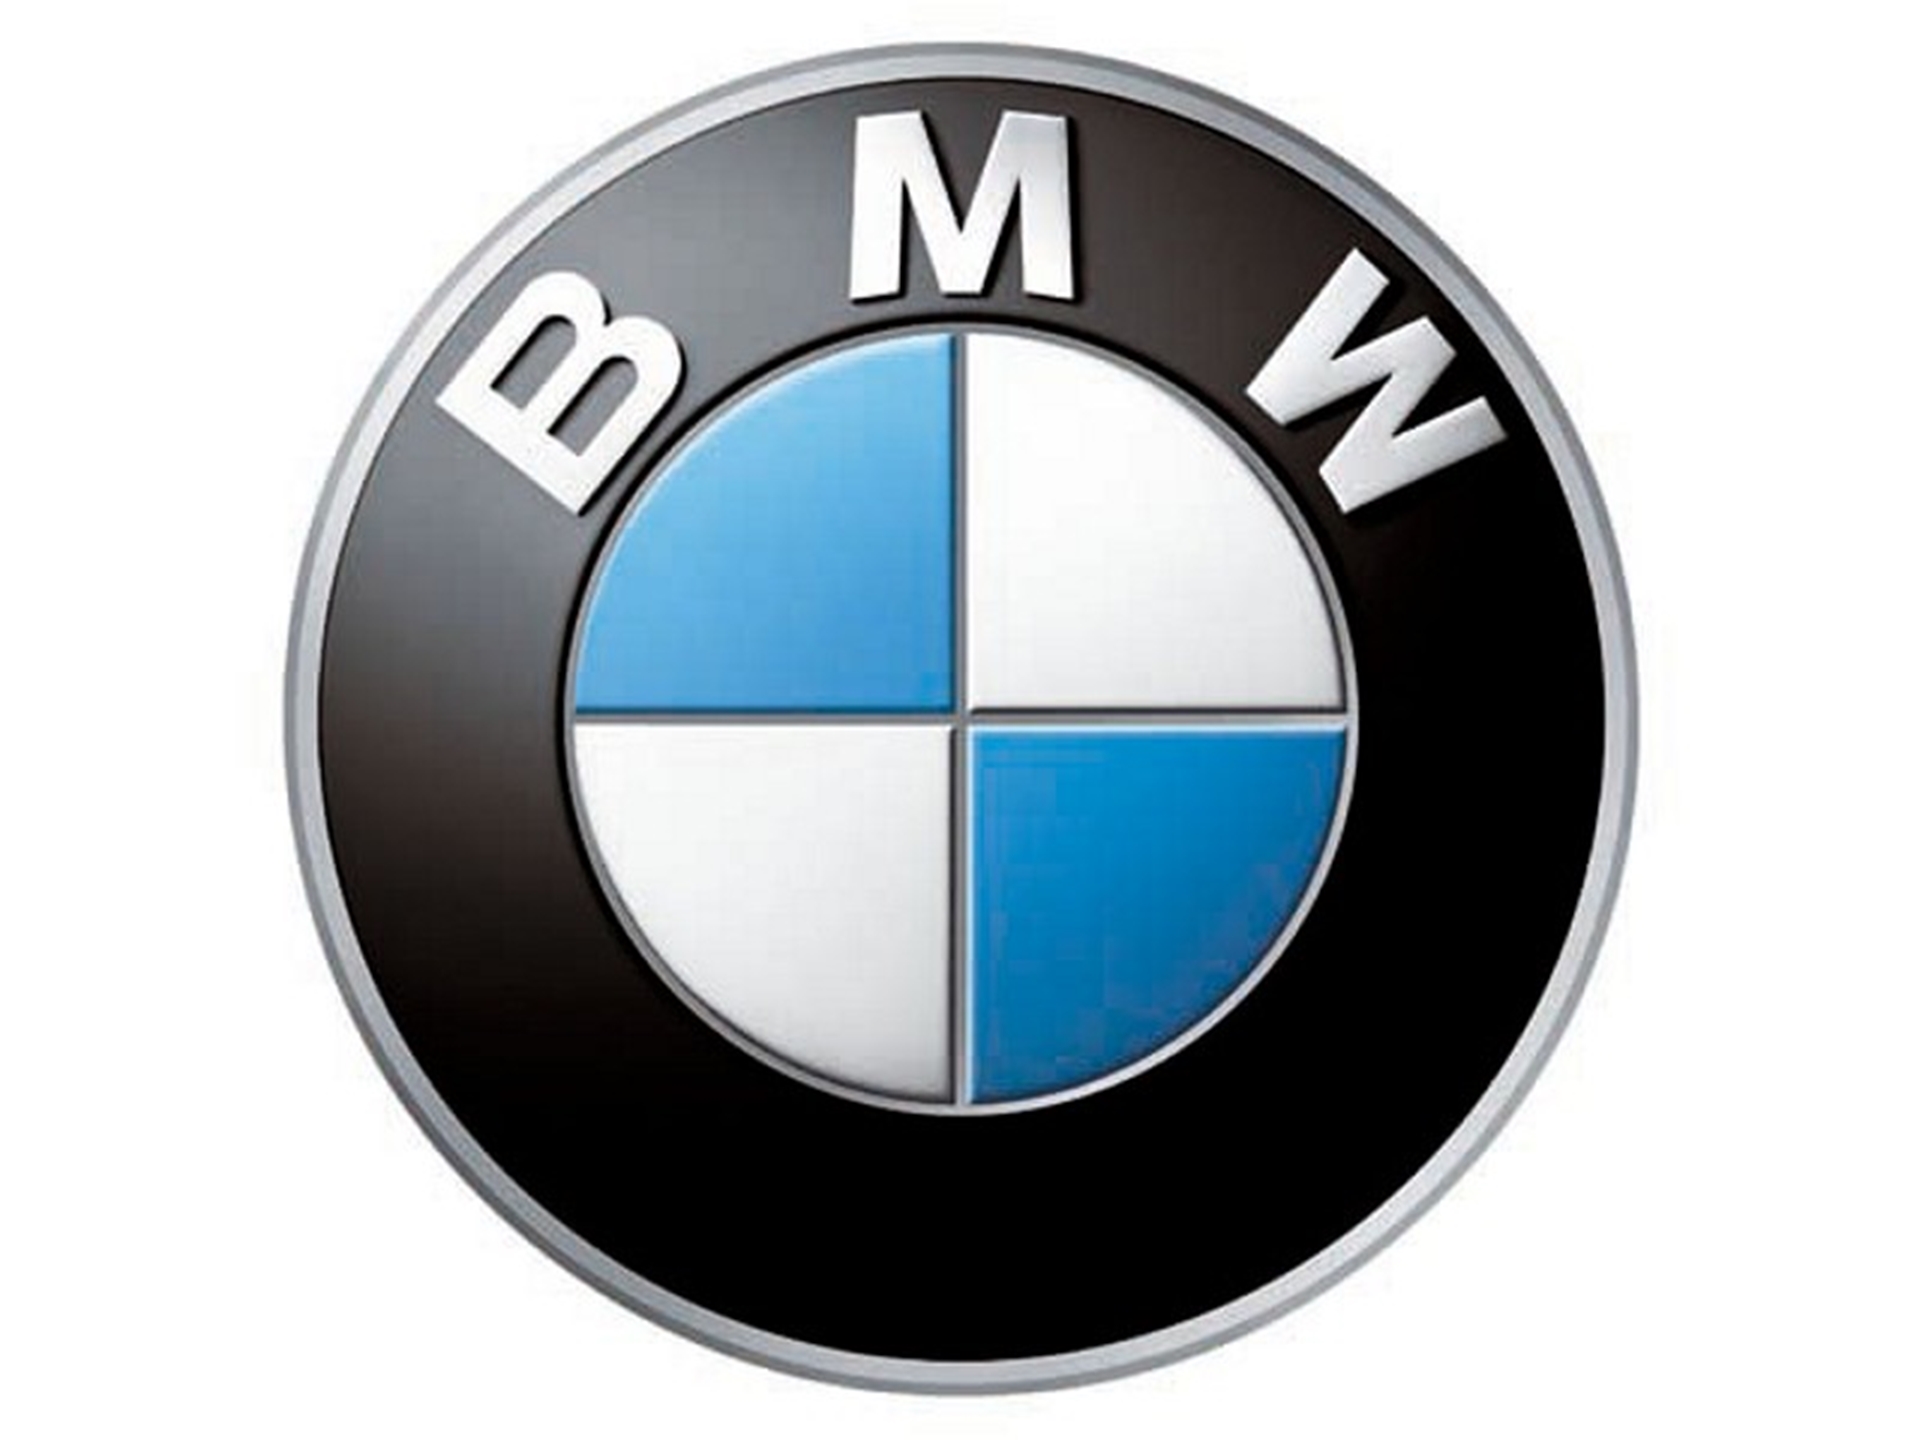 Statement Dr. Norbert Reithofer, chairman of the board of management of BMW AG, annual accounts press conference